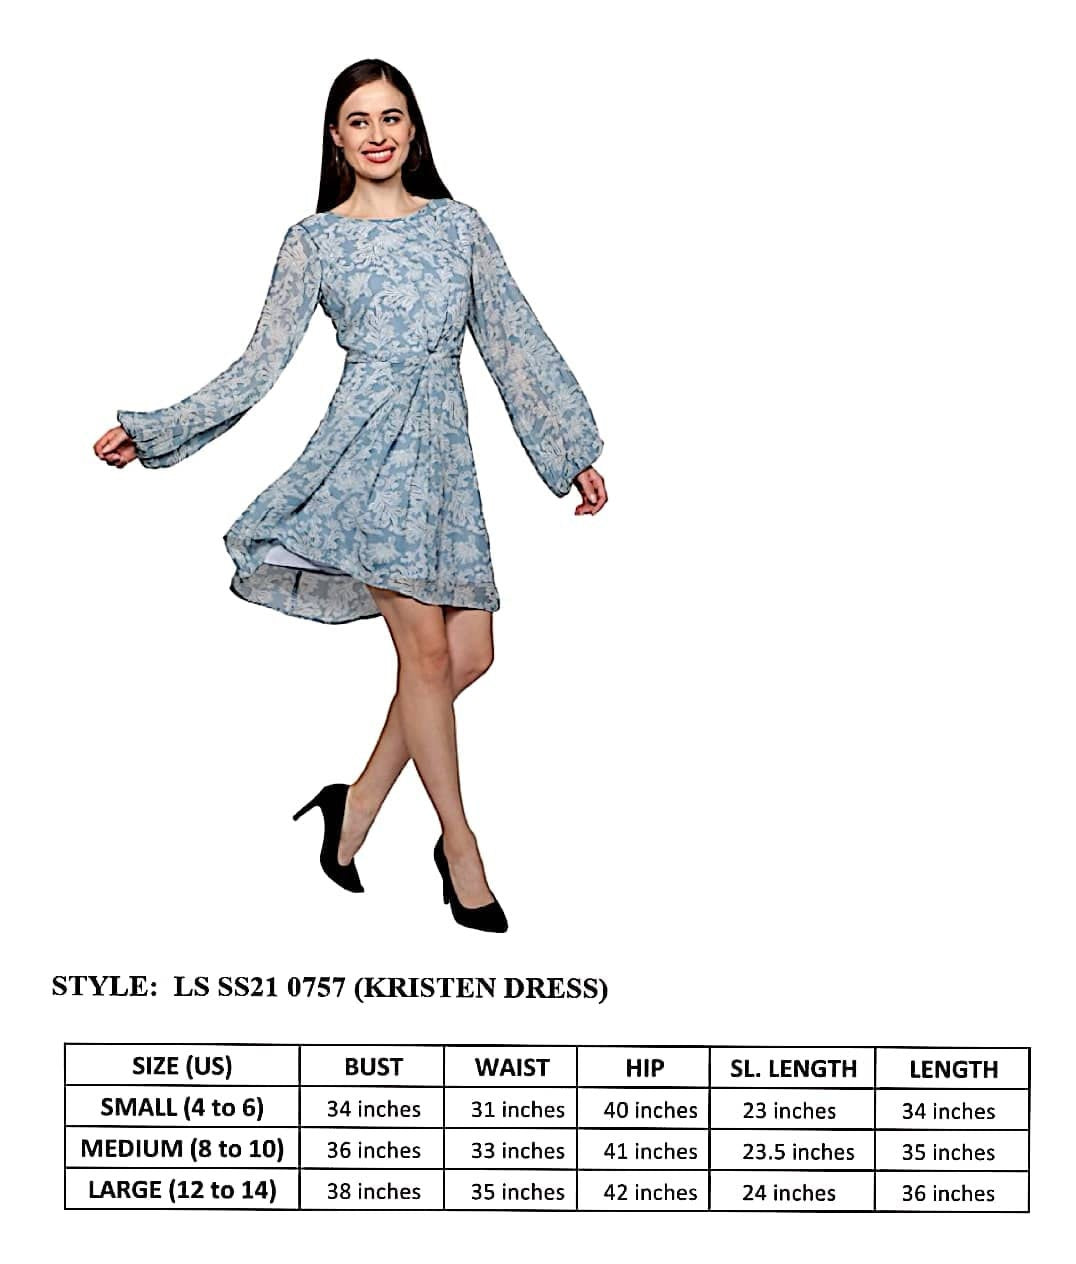 Women's_dress  Sexy_Dress_for_her  Long_Sleeves_Dress  Georgette_Dress  For_her_Gift  Floral_Design_Dress  Dresses_for_Women  Blue printed_Women's_Dress  Blue_short_Dress  Blue_Casual_dress